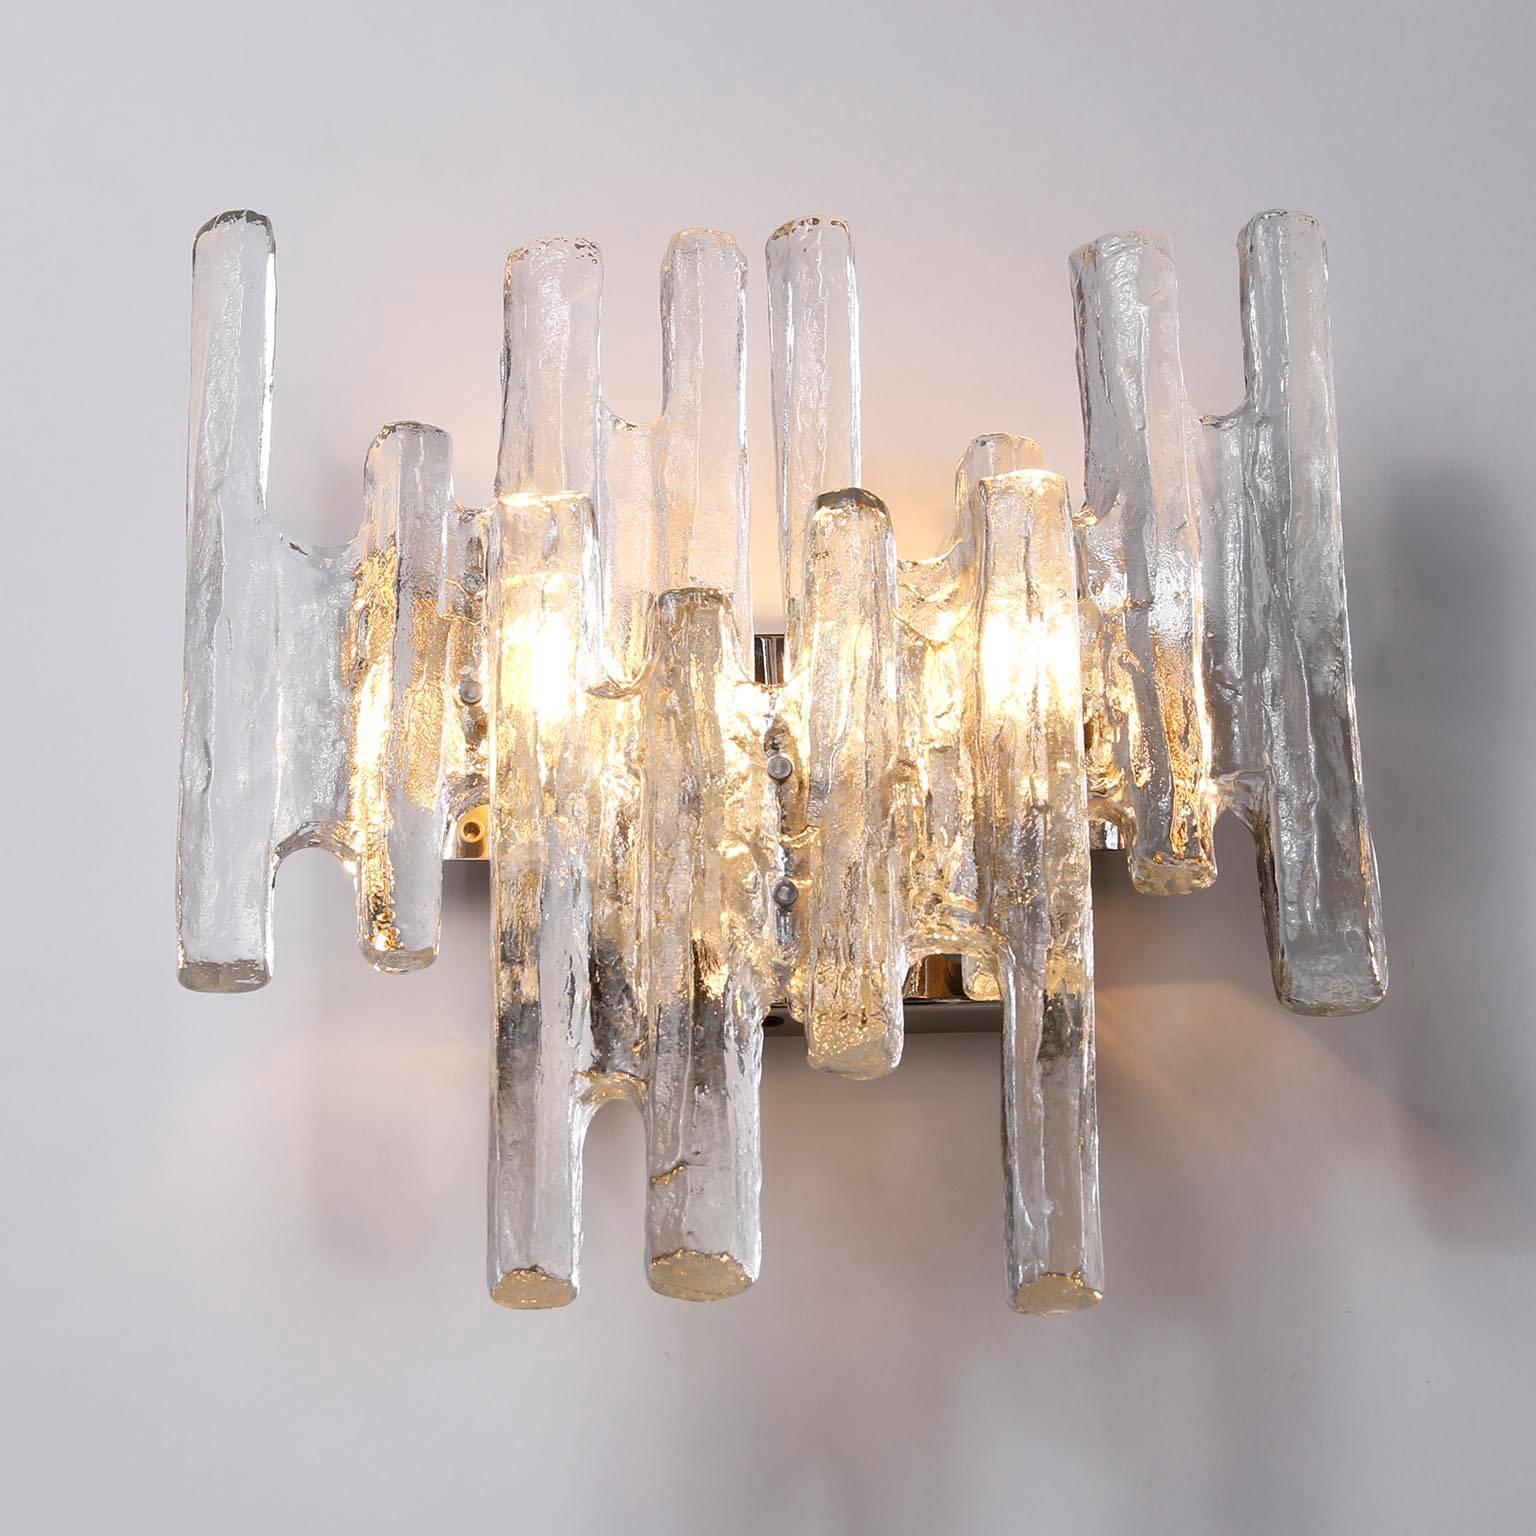 One of Seven Large Kalmar Sconces Wall Lights 'PAN', Glass Nickel, 1970s For Sale 4